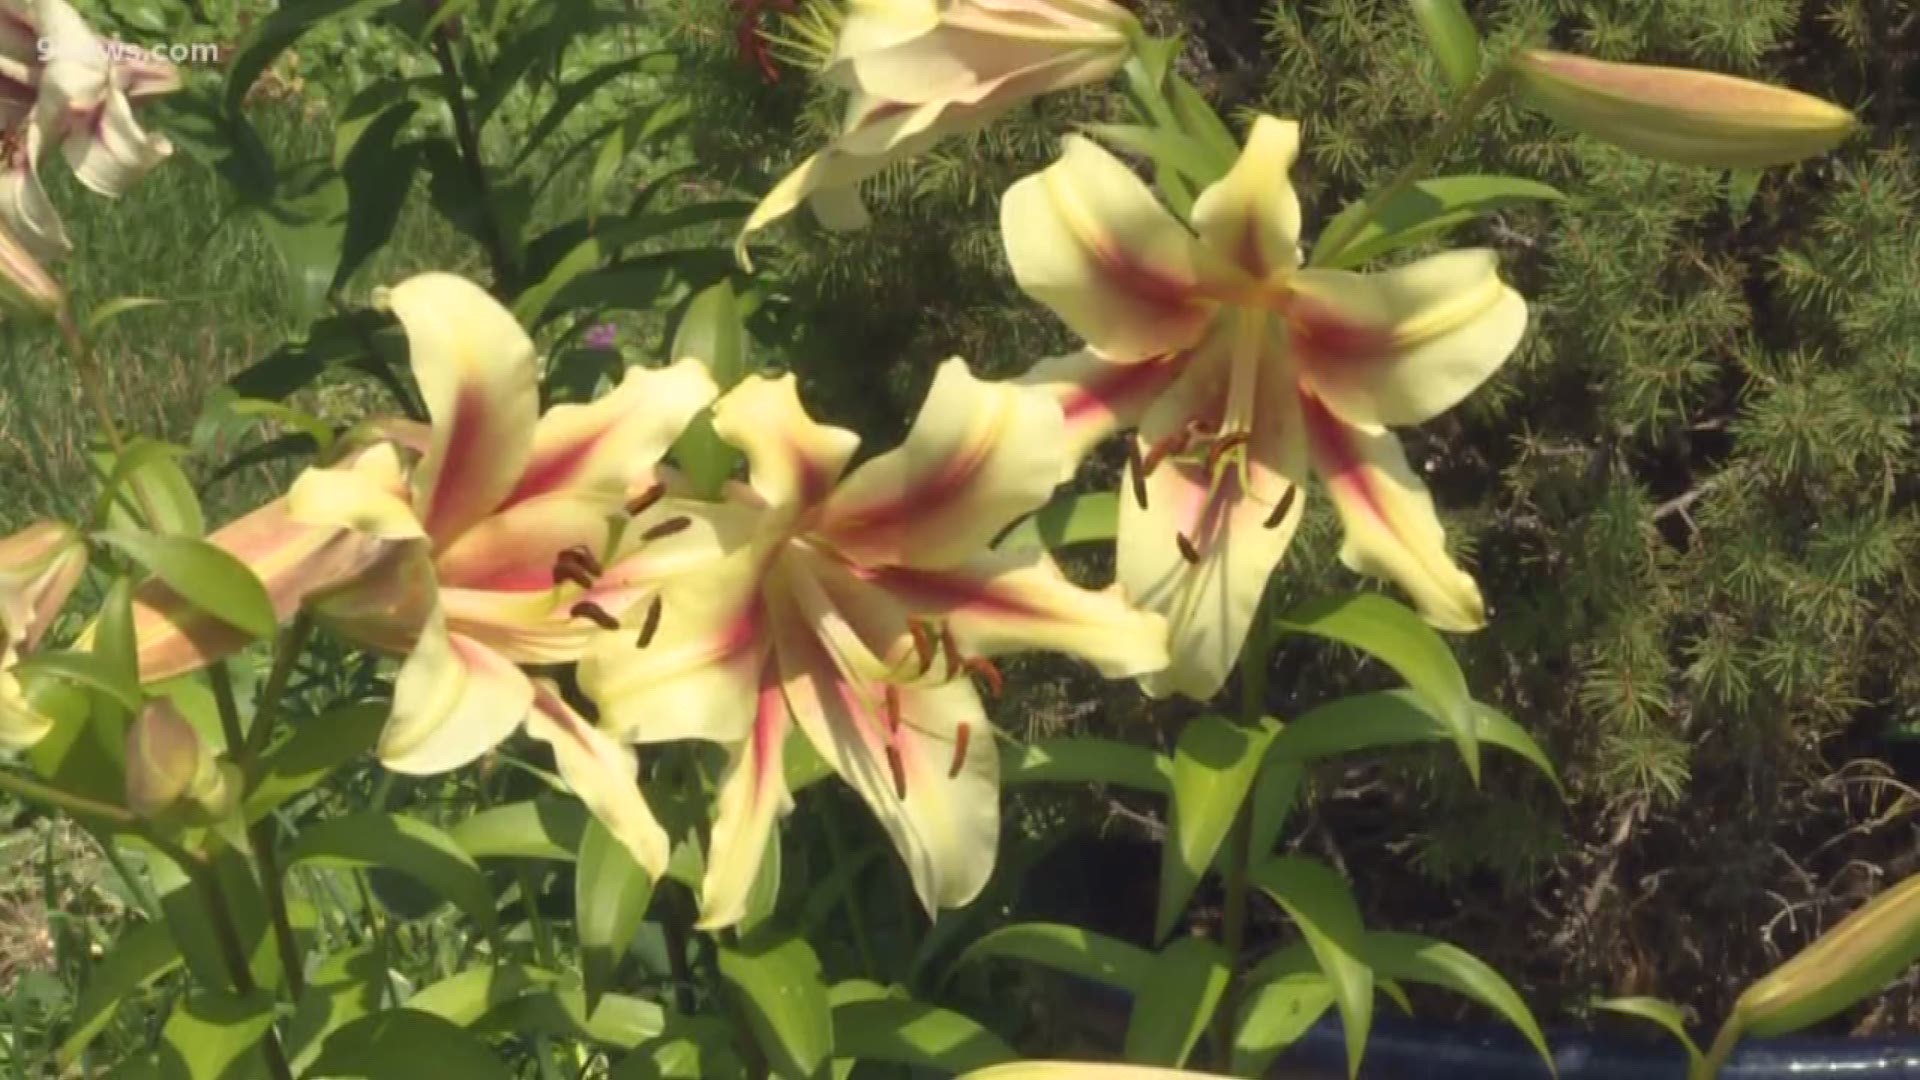 Rob Proctor has some tips to keep your plants and garden looking good and healthy during the mid-summer months.